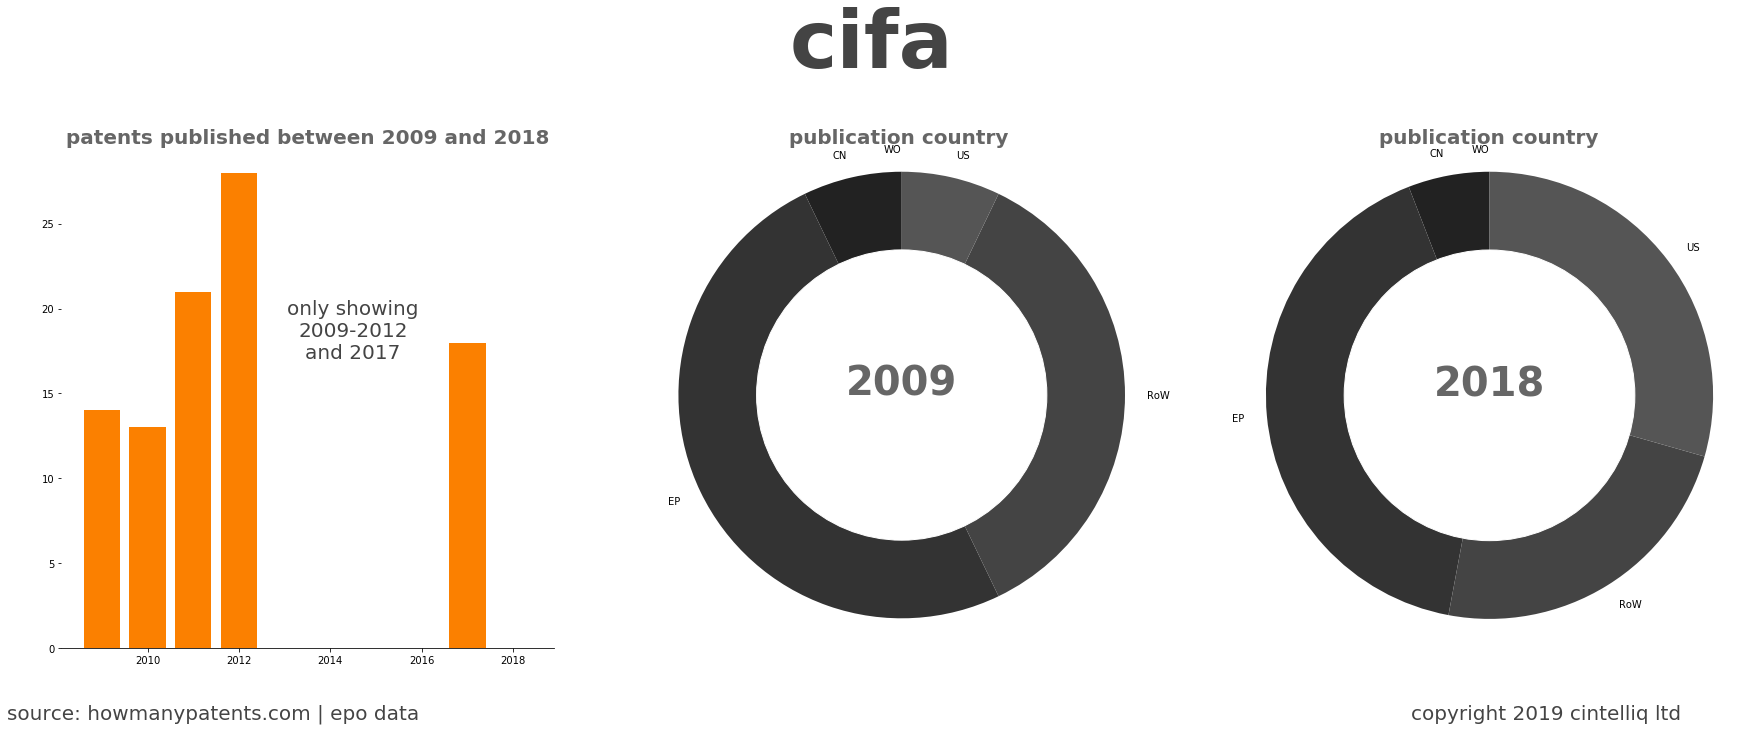 summary of patents for Cifa